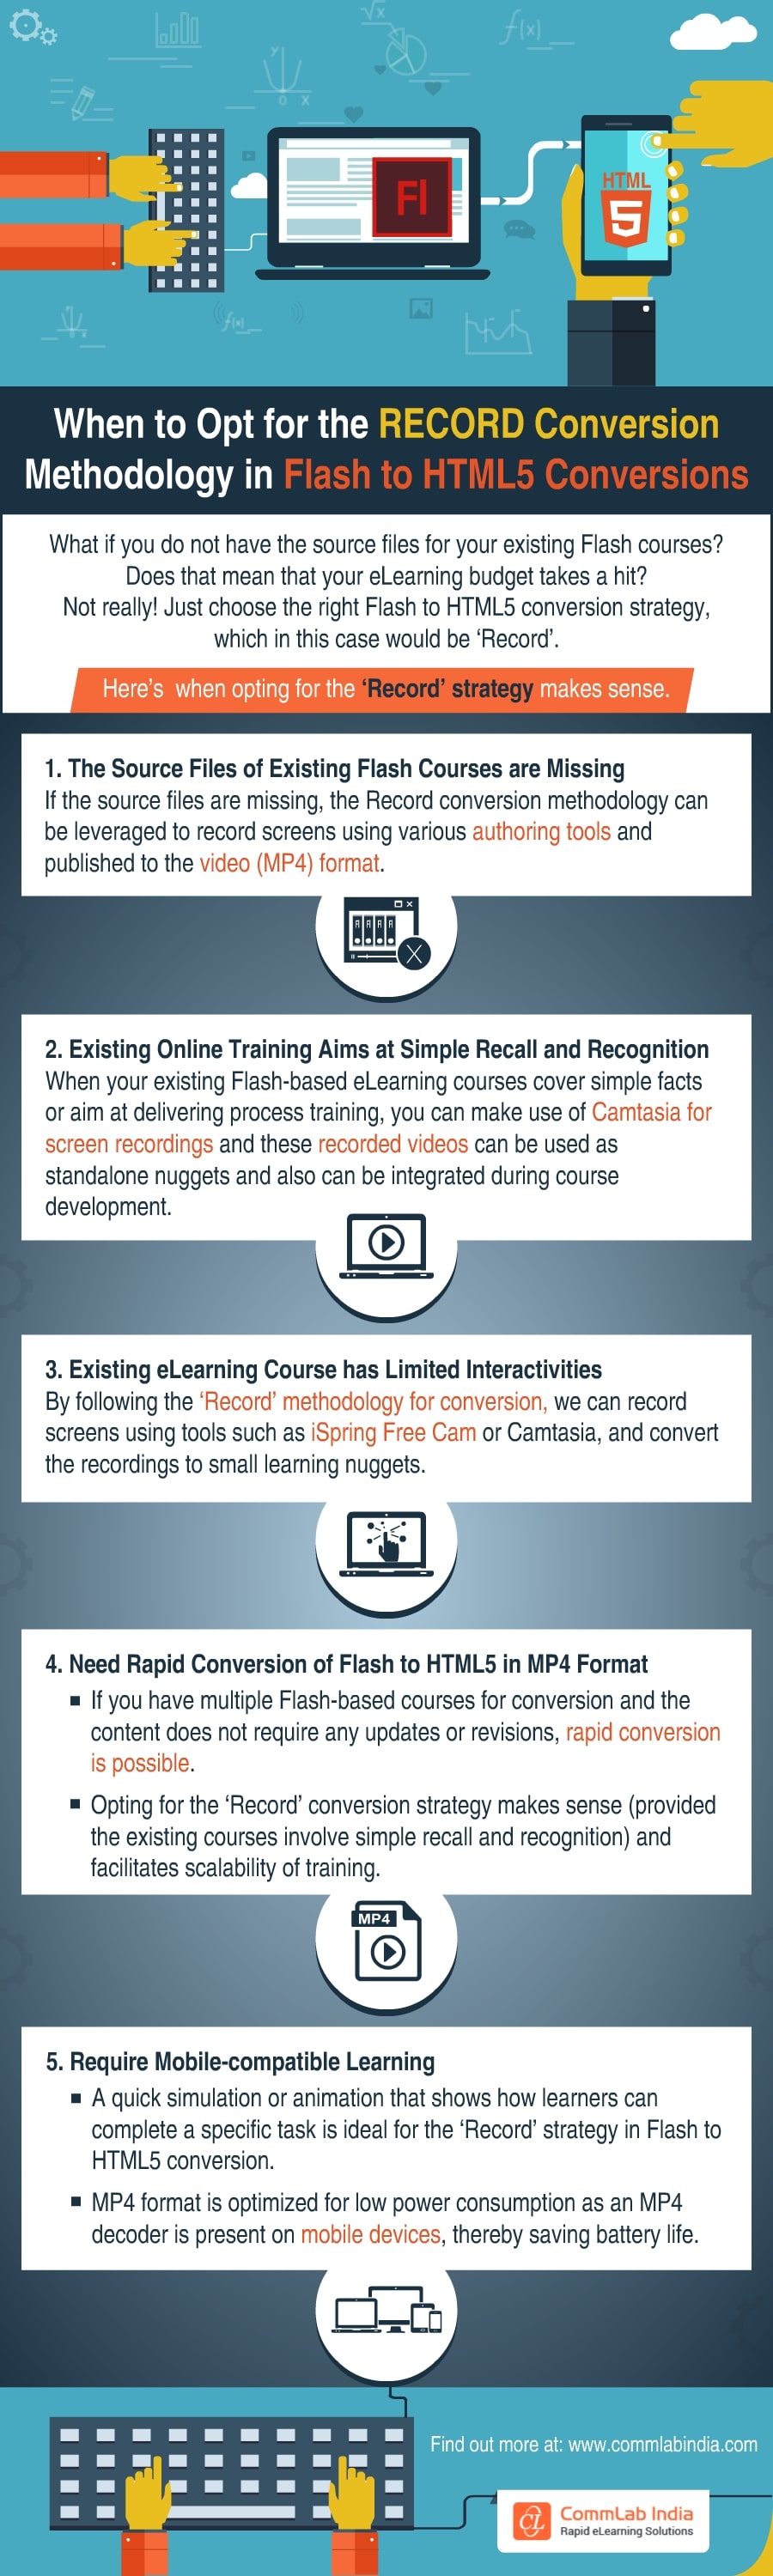 When to Opt for the RECORD Conversion Methodology in Flash to HTML5 Conversions [Infographic]